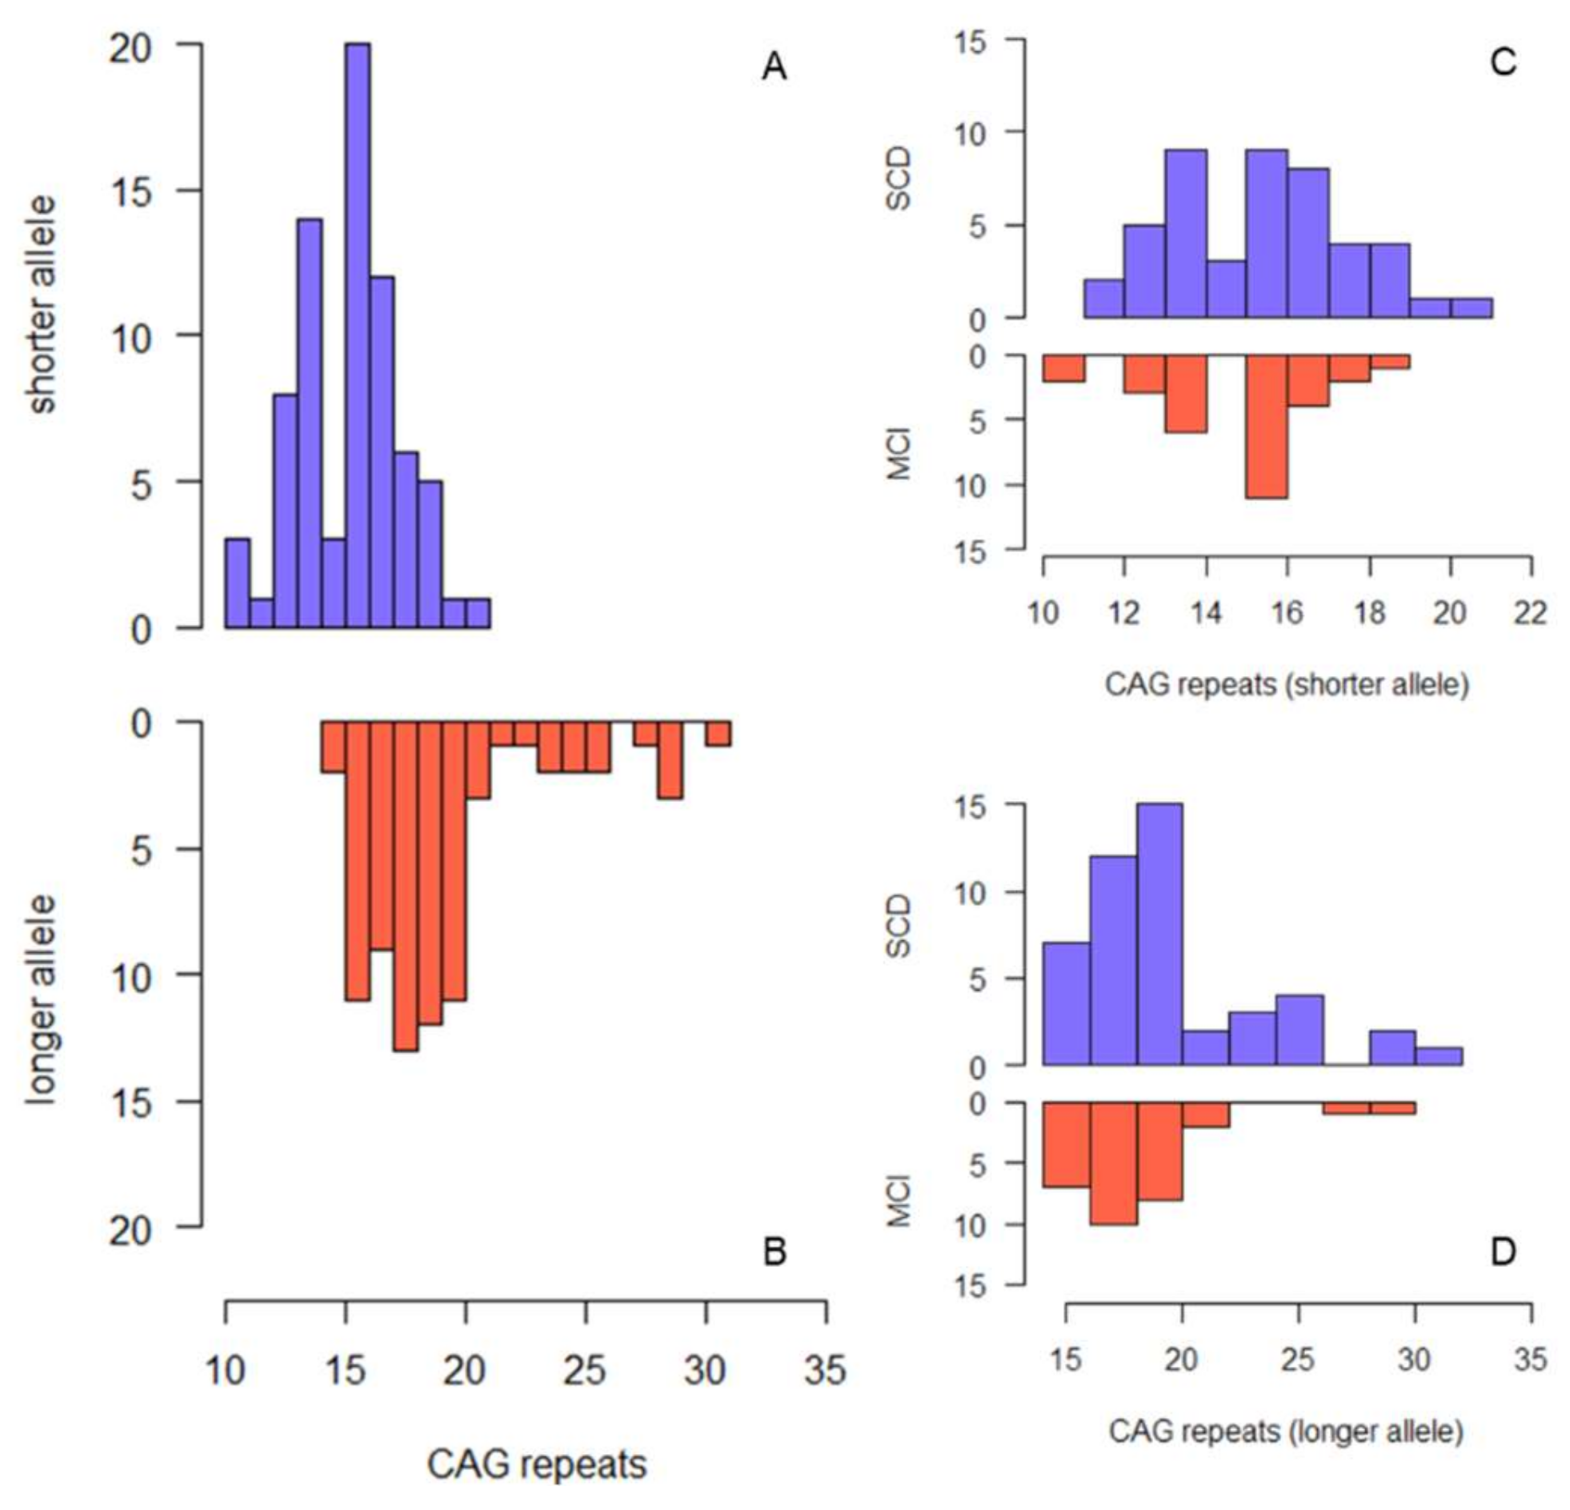 Diagnostics | Free Full-Text | The Effect of CAG Repeats within the  Non-Pathological Range in the HTT Gene on Cognitive Functions in Patients  with Subjective Cognitive Decline and Mild Cognitive Impairment